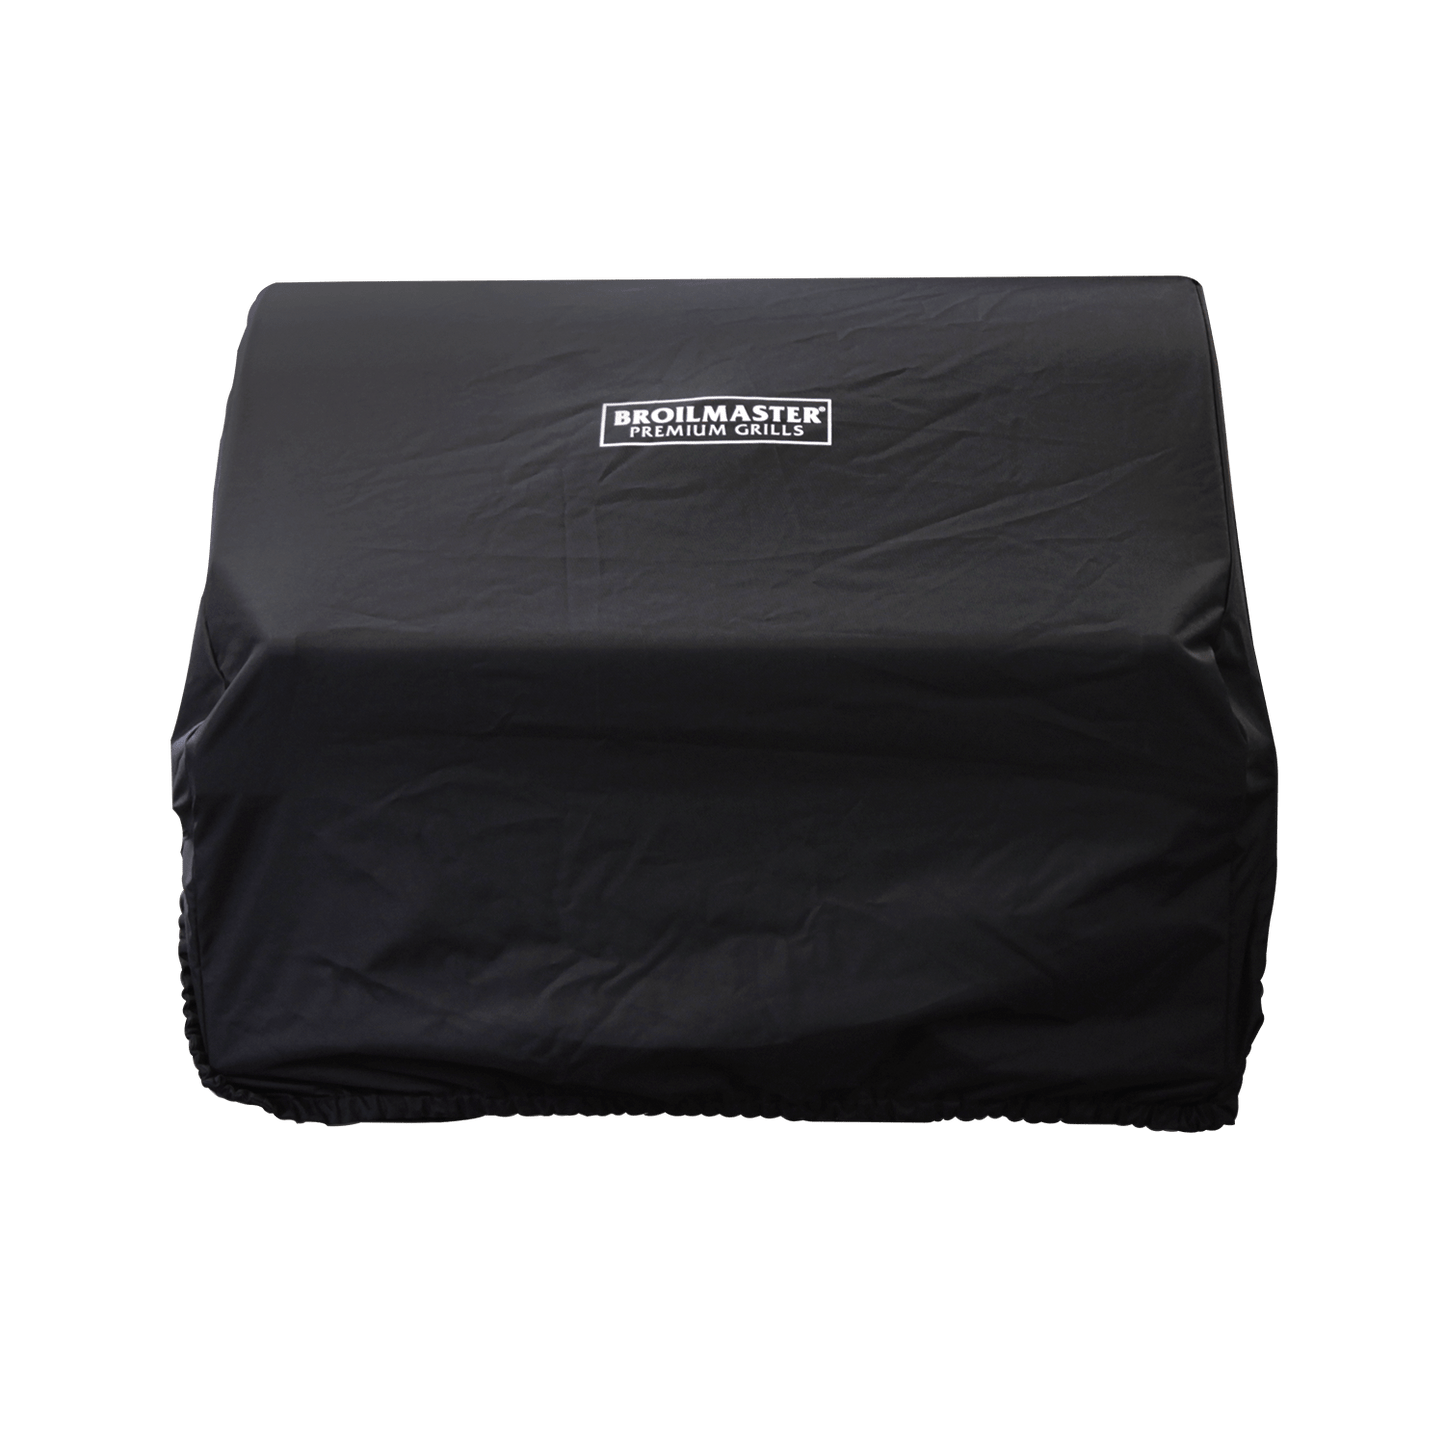 Broilmaster 42" Cover for Stainless Steel Built-In Grills